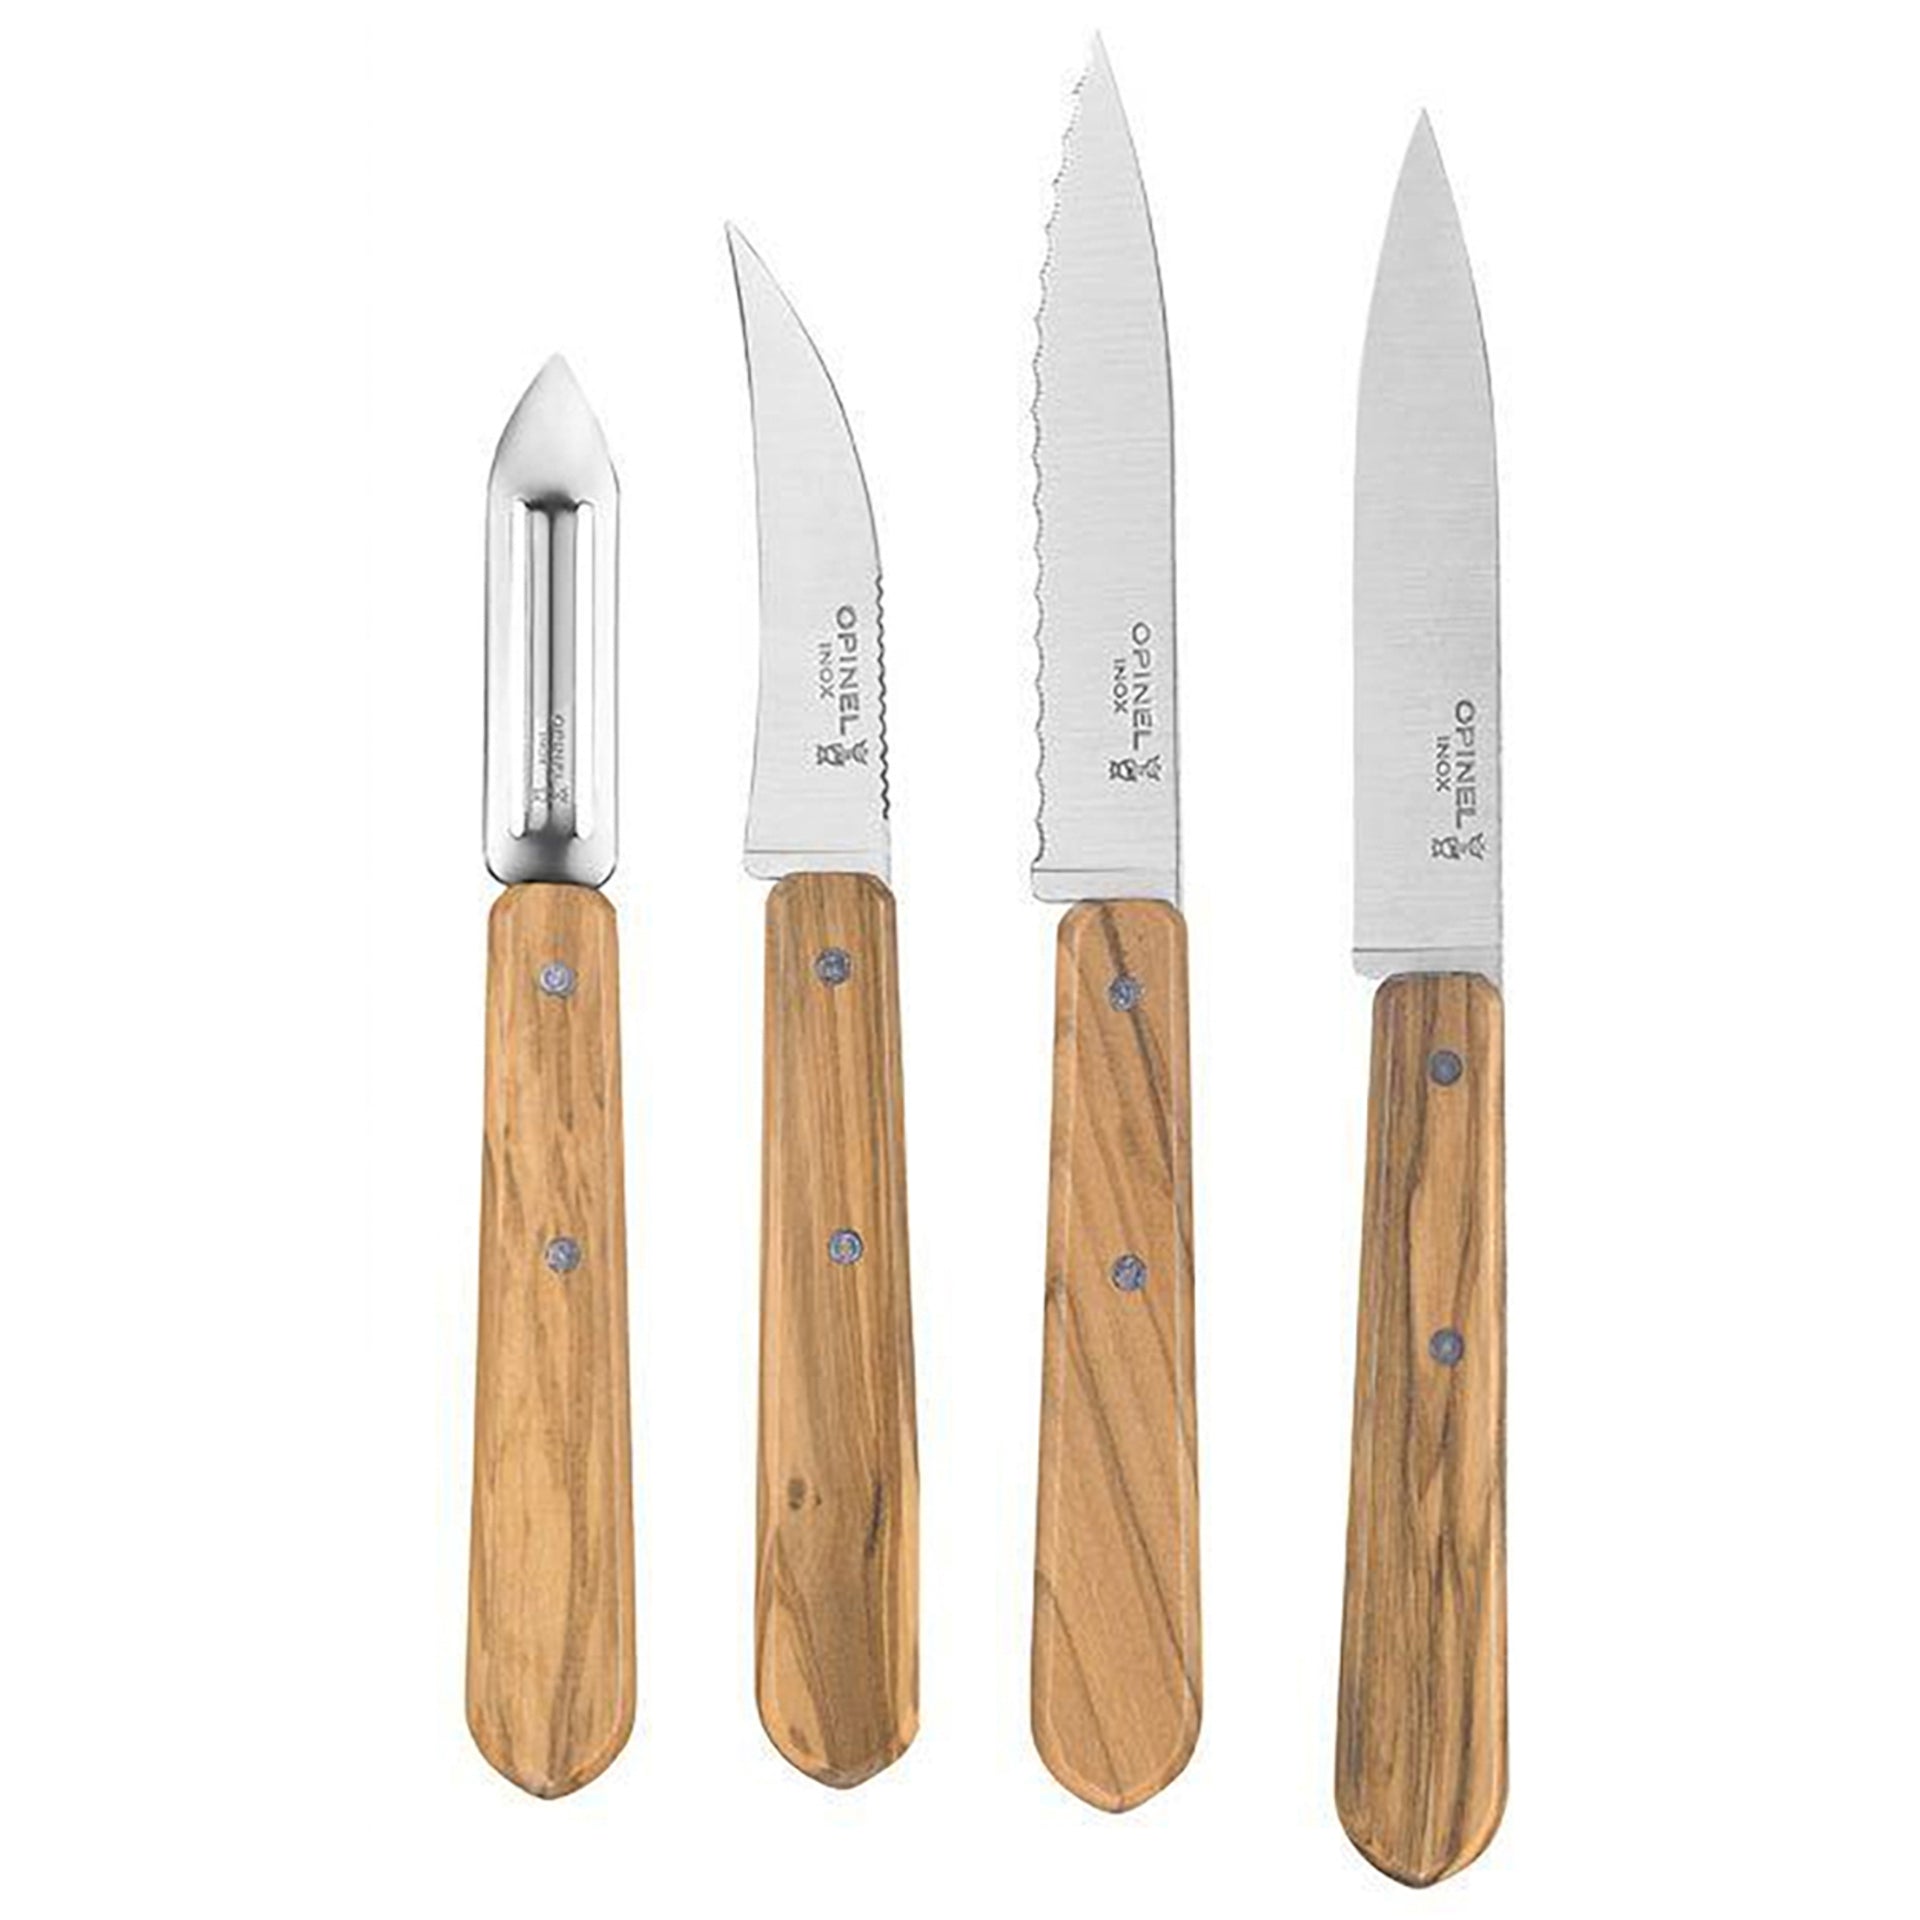 Opinel 4-Piece Essentials Small Kitchen Knives Set, Olive Wood Handles